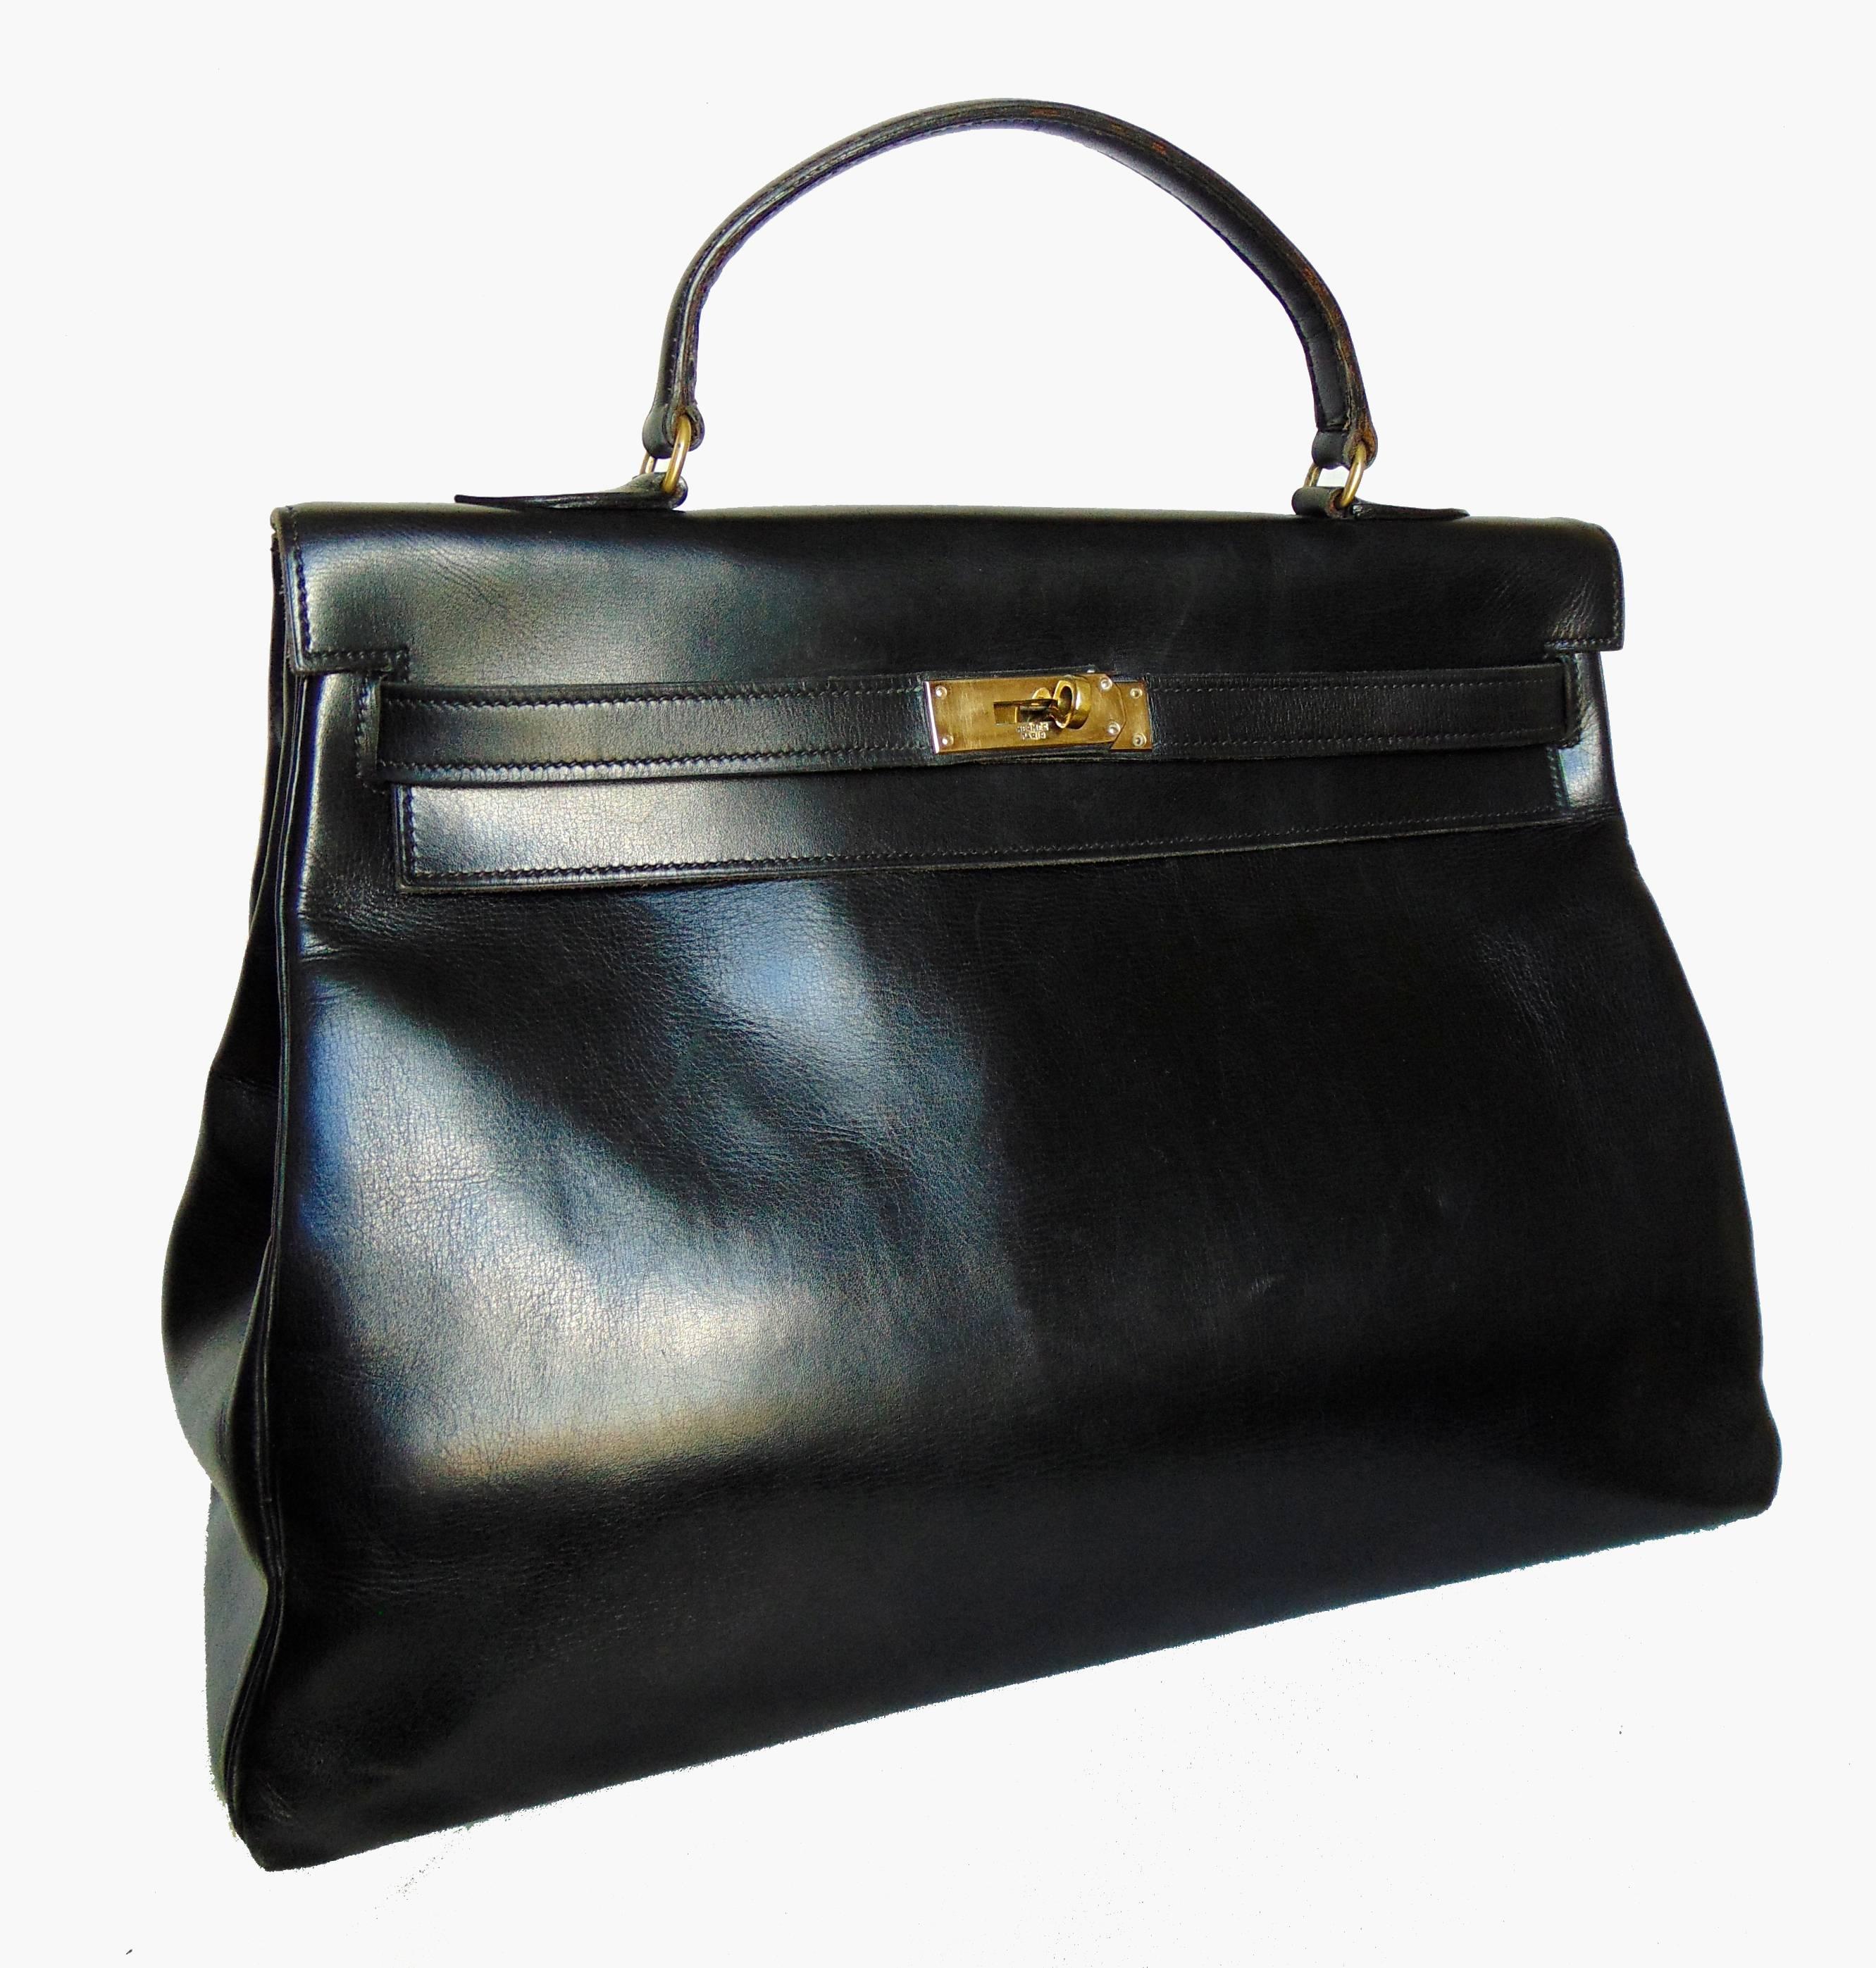 This rare 35cm handbag was created by Hermes in 1947.  Originally coined the Sac a Depeches - this piece was made about 10 years before Grace Kelly wore the style that we now know as the 